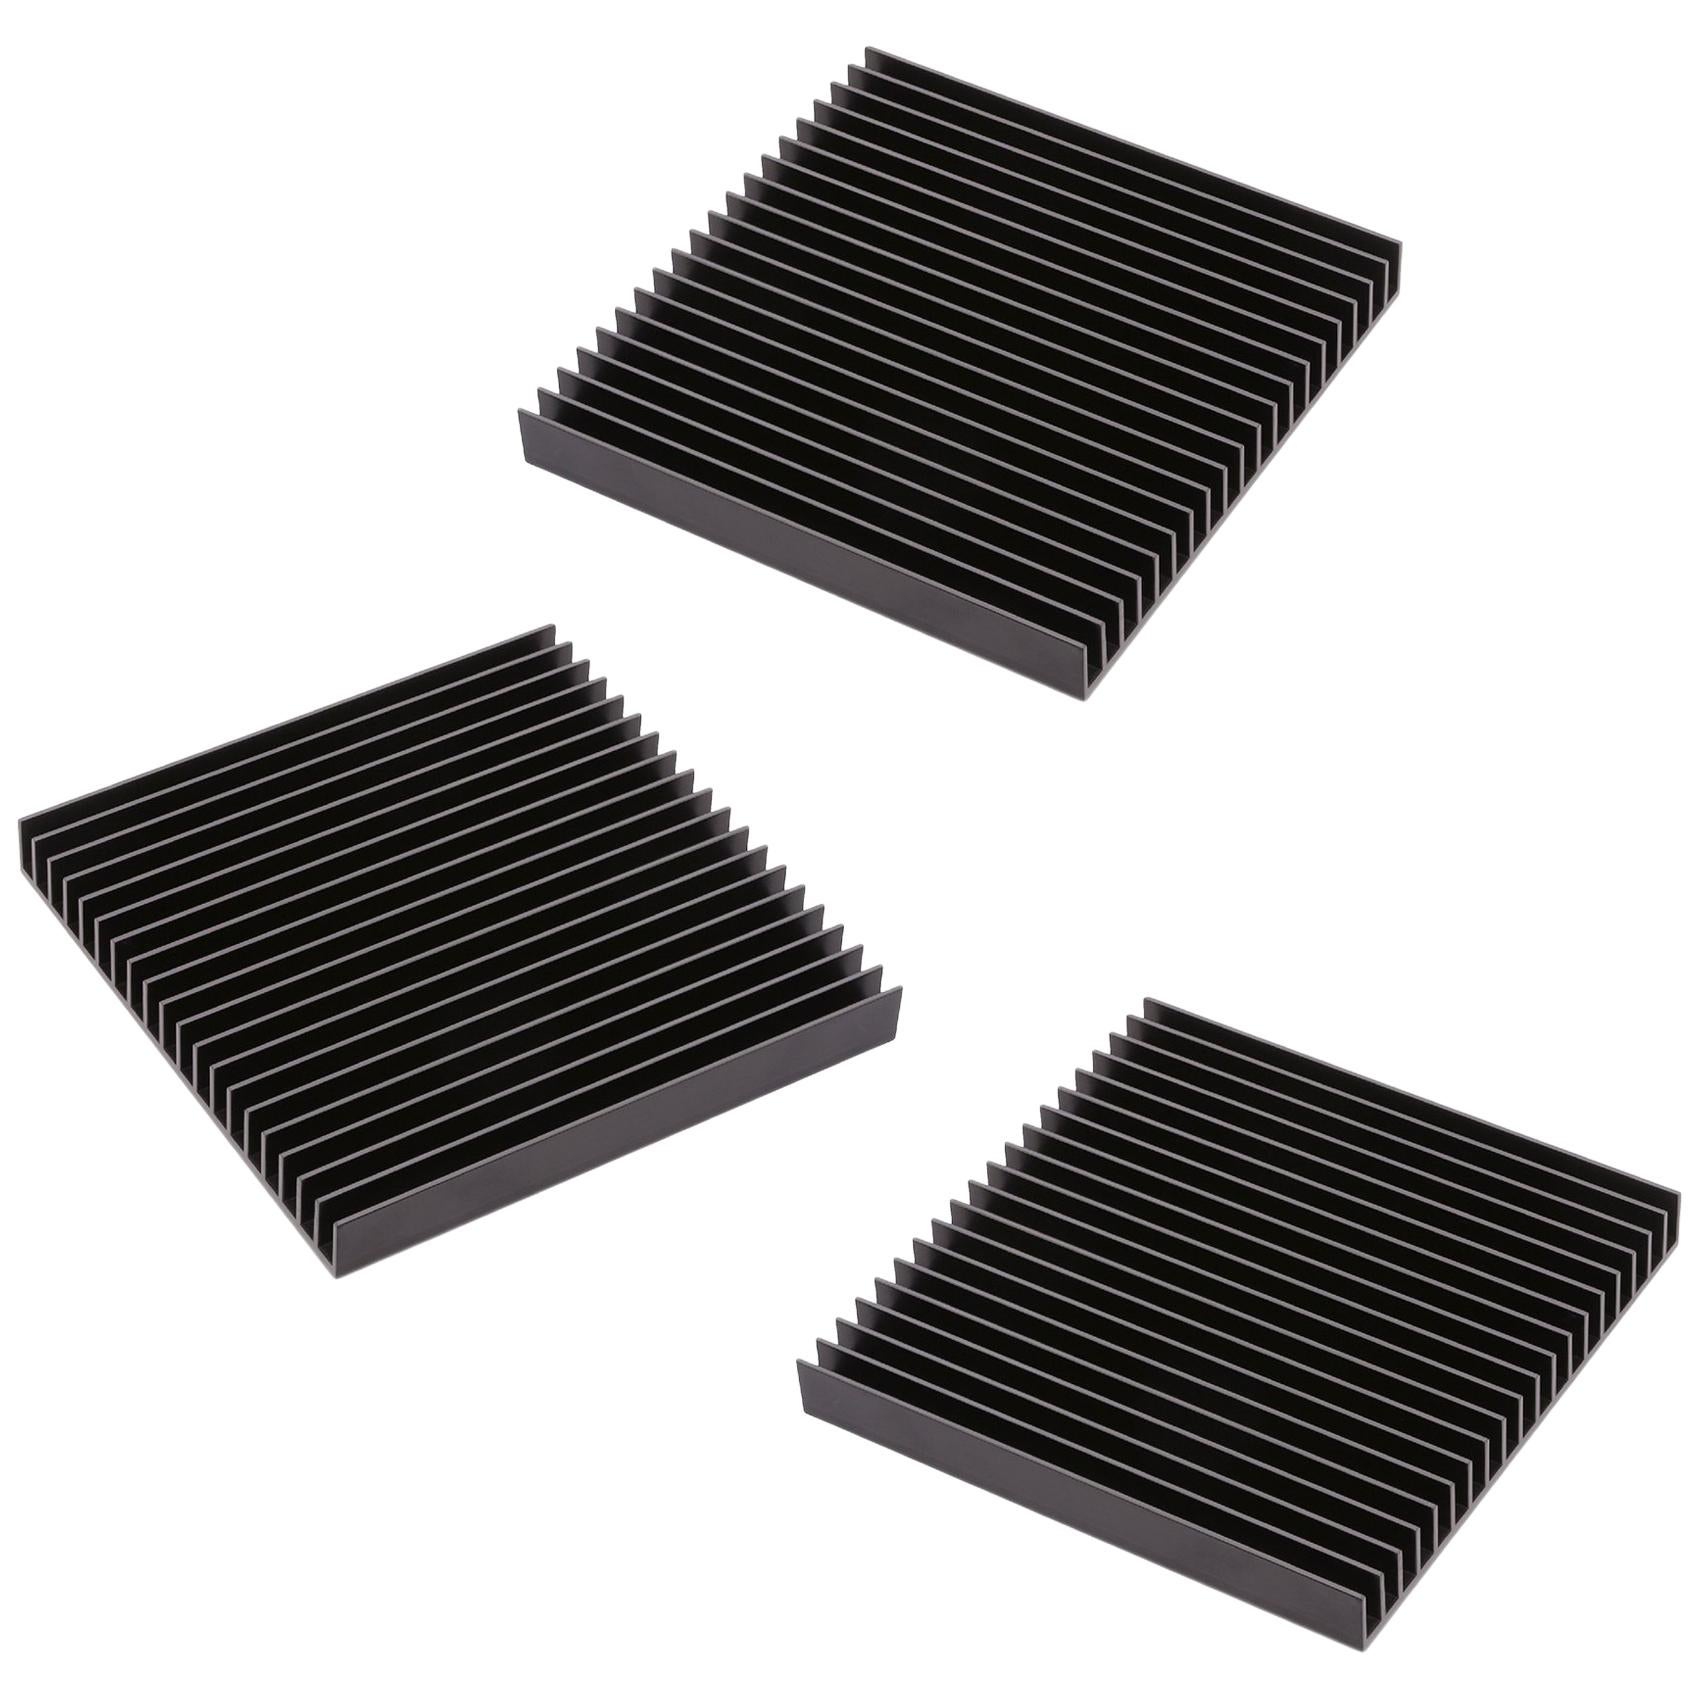 This listing is for 3 Fin Trivets from Souda. Each one is packaged individually.

Made using a manufacturing process utilized for railways, medical devices, and electronics, the Fin Trivets bring an Industrial touch to your tabletop. Both durable